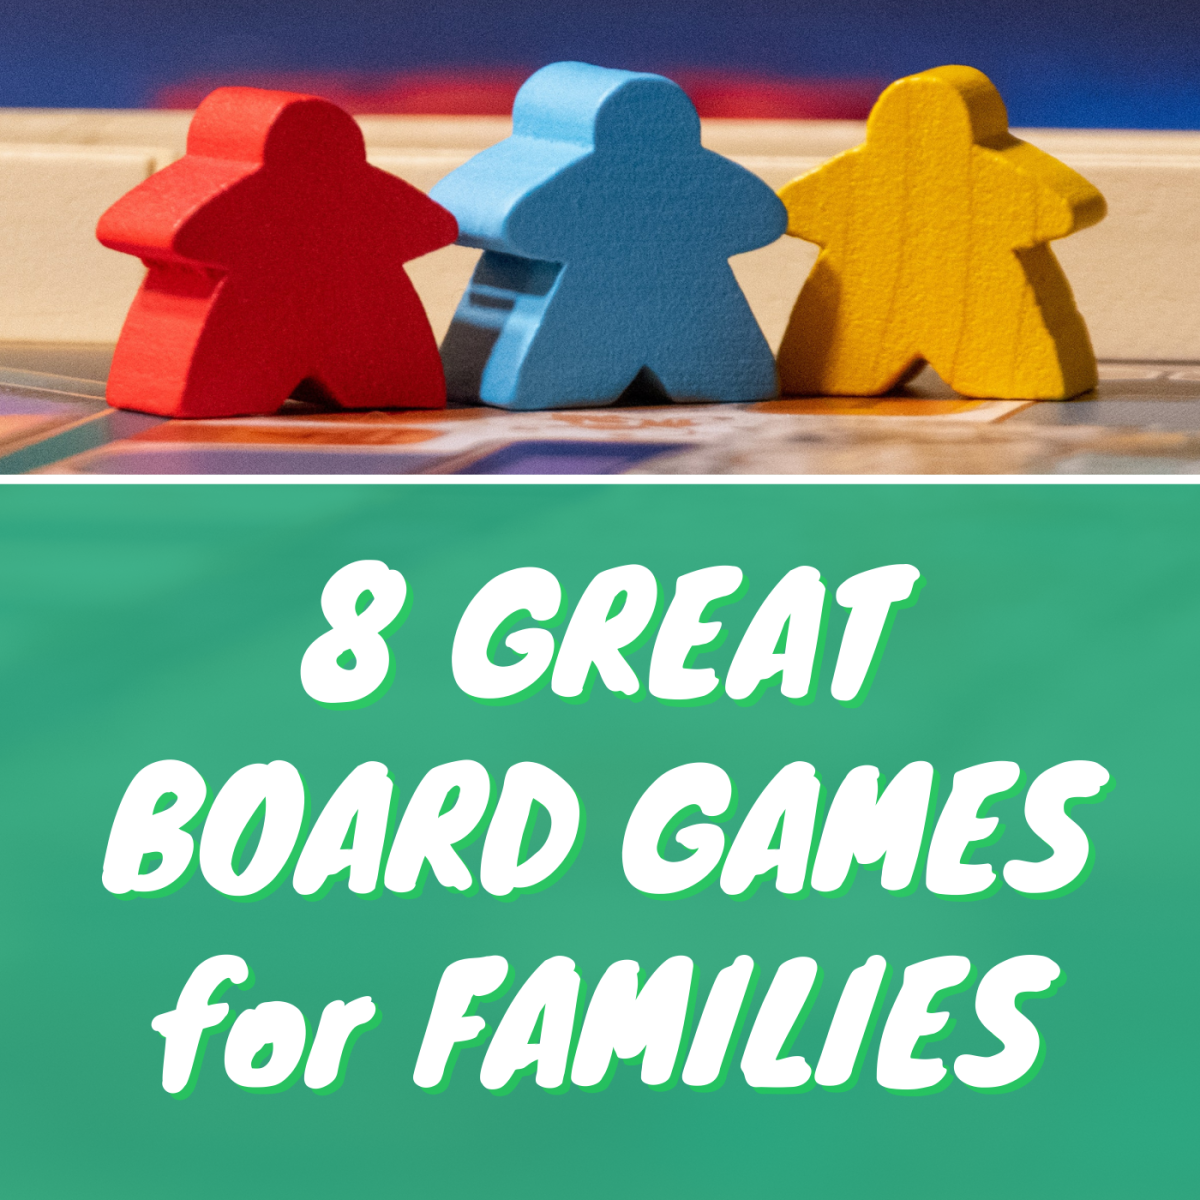 Family games aren't just for kids. Adults and teens will enjoy these eight amazing board games as well!